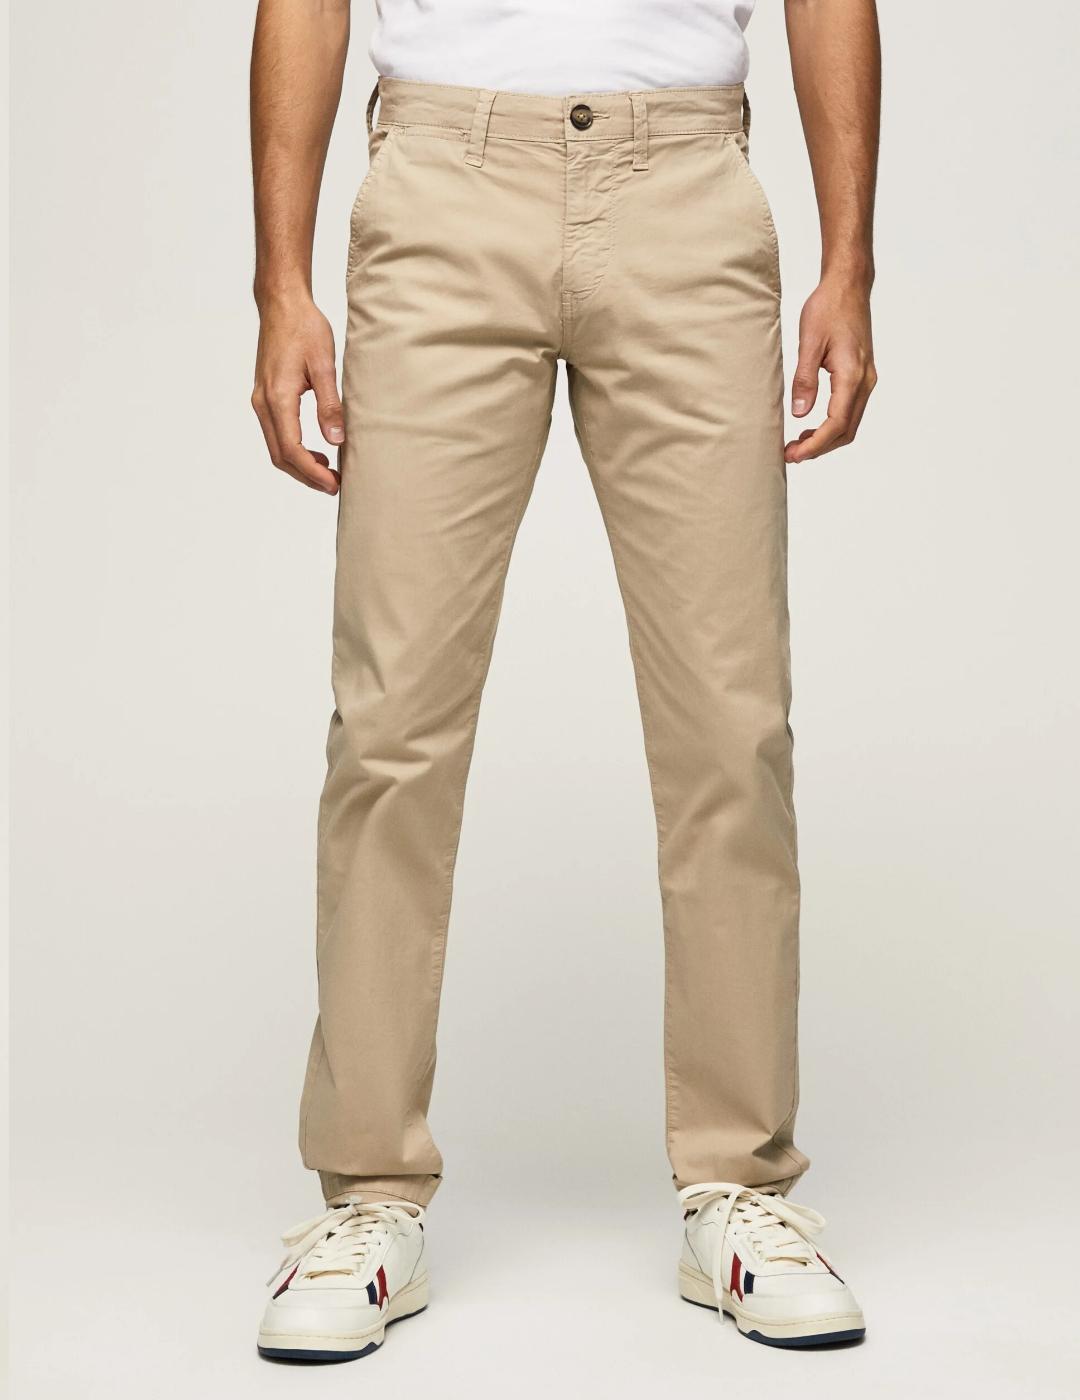 Pantalones chinos fit slim Charly beige hombre pepe jeans